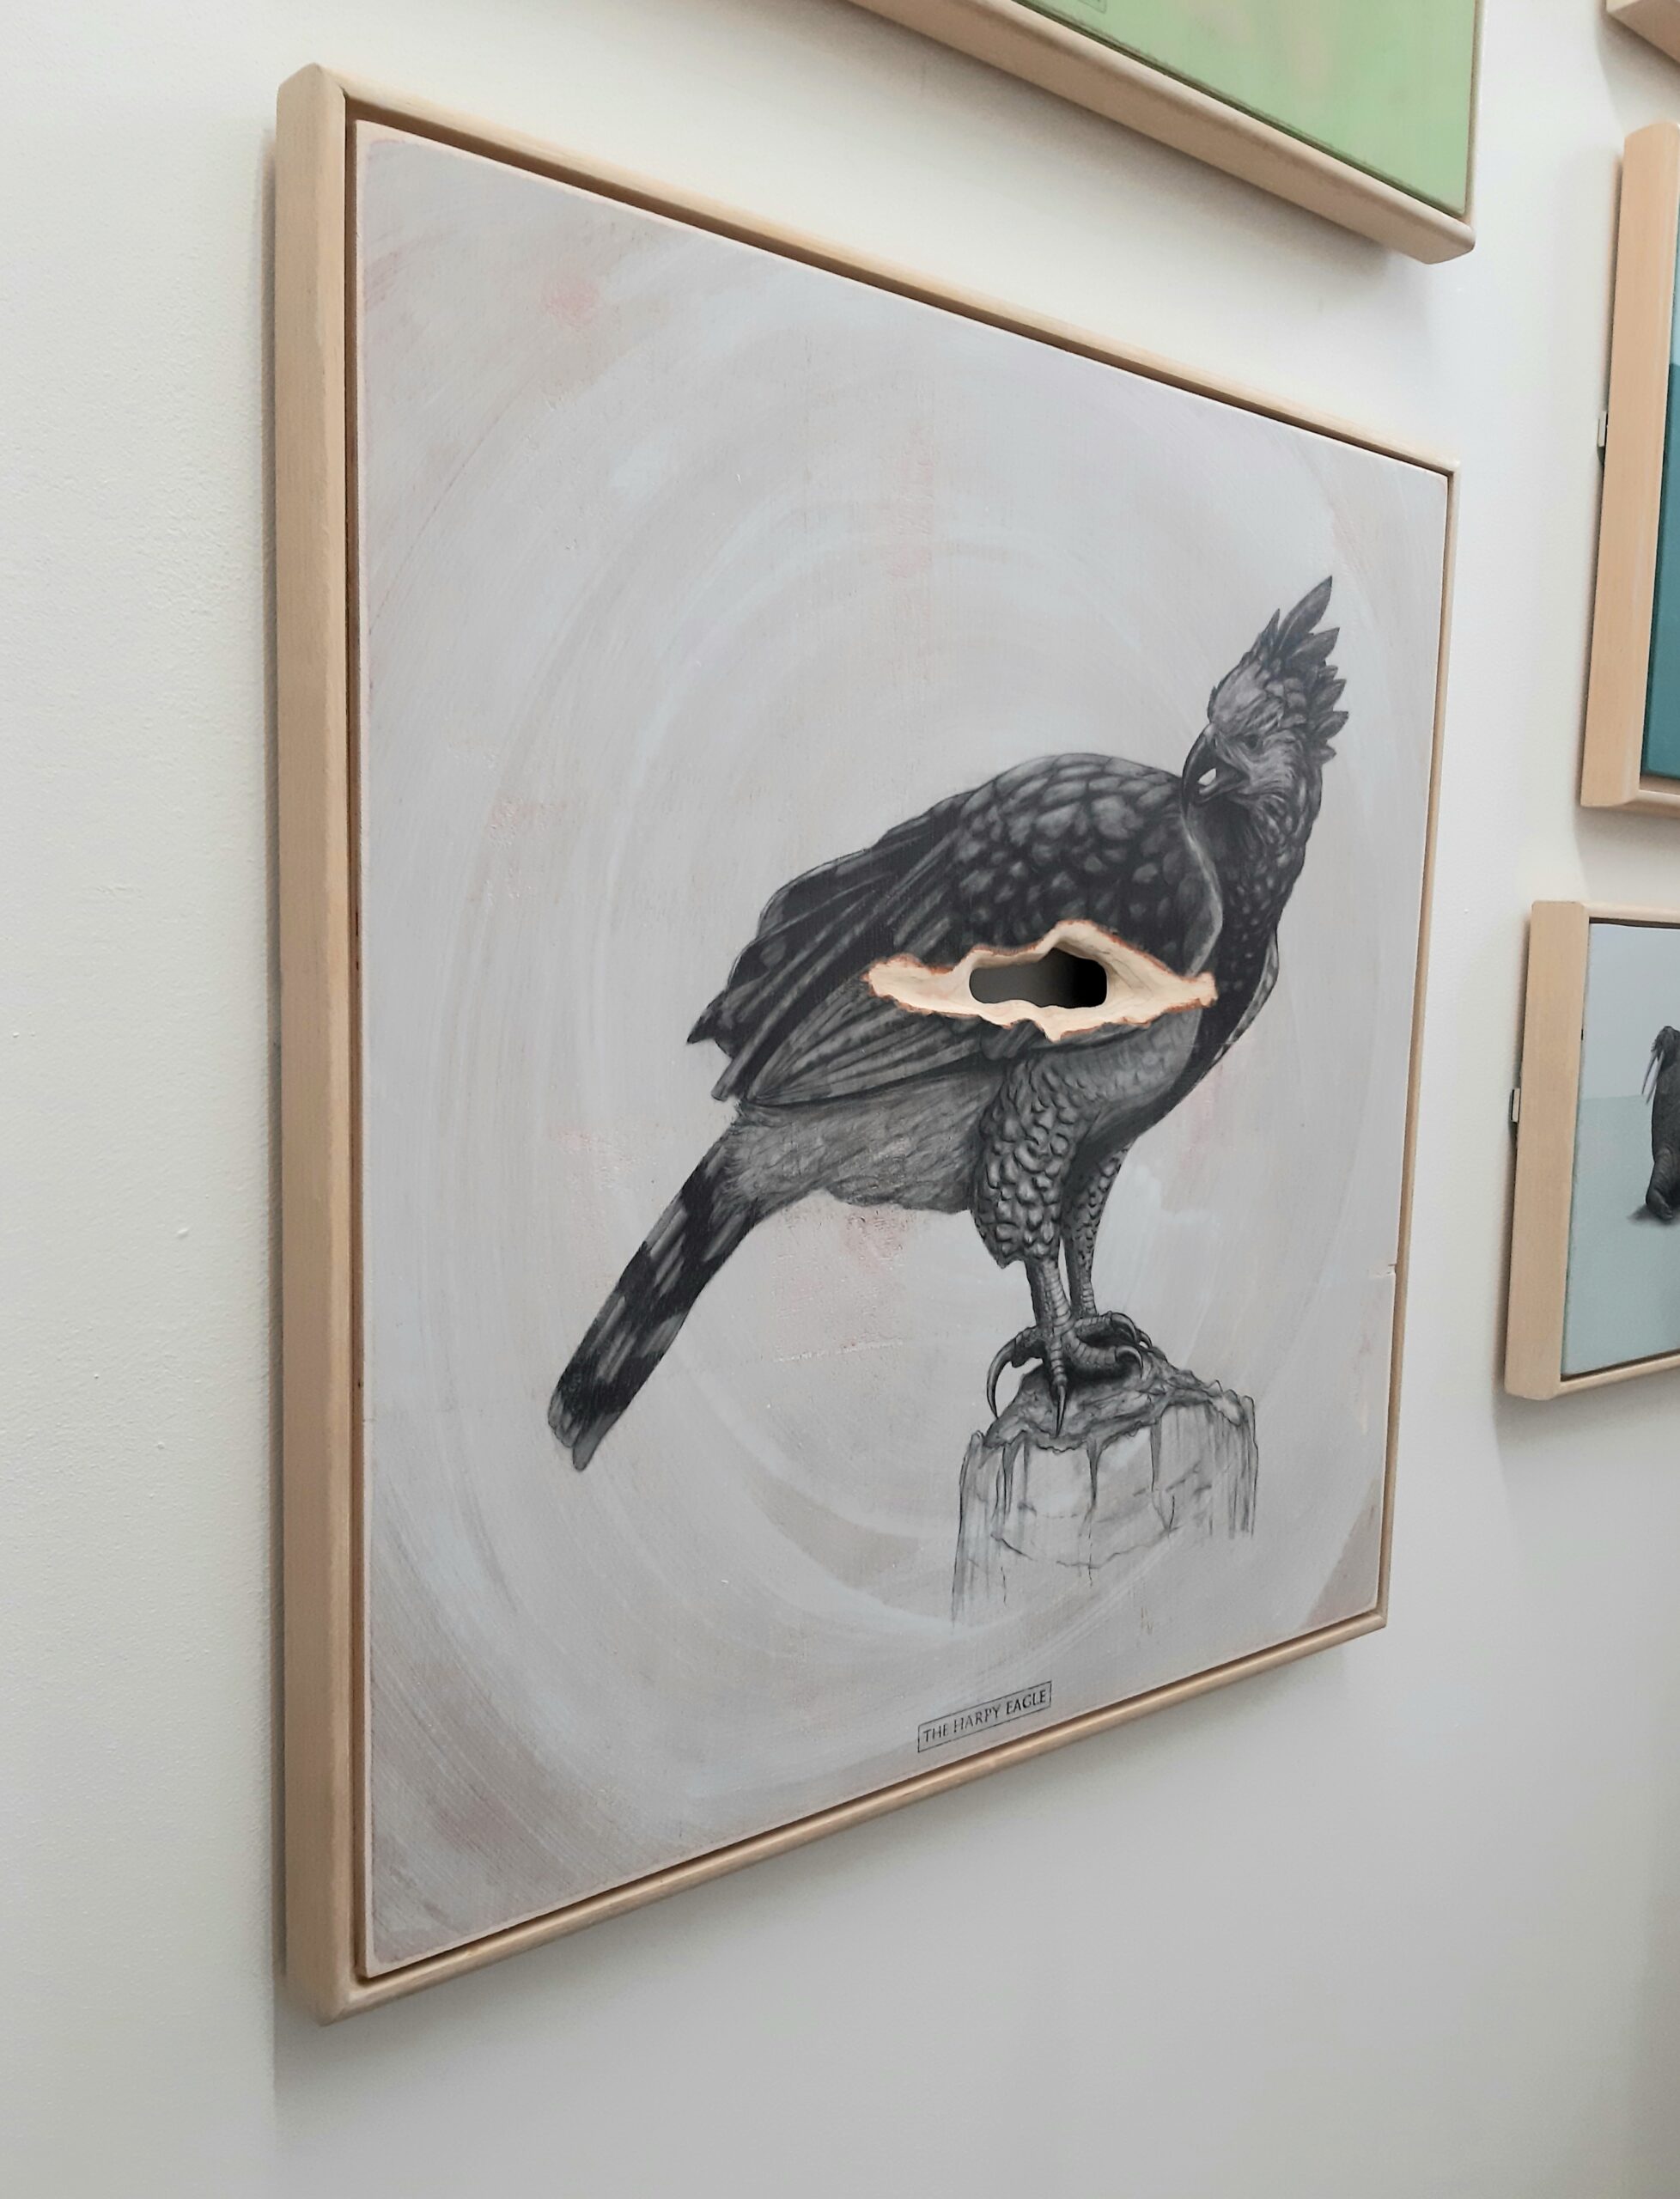 The Harpy Eagle, 2019. Graphite on whitewashed plywood that is then sanded. 65 x 65 x 4 cm.